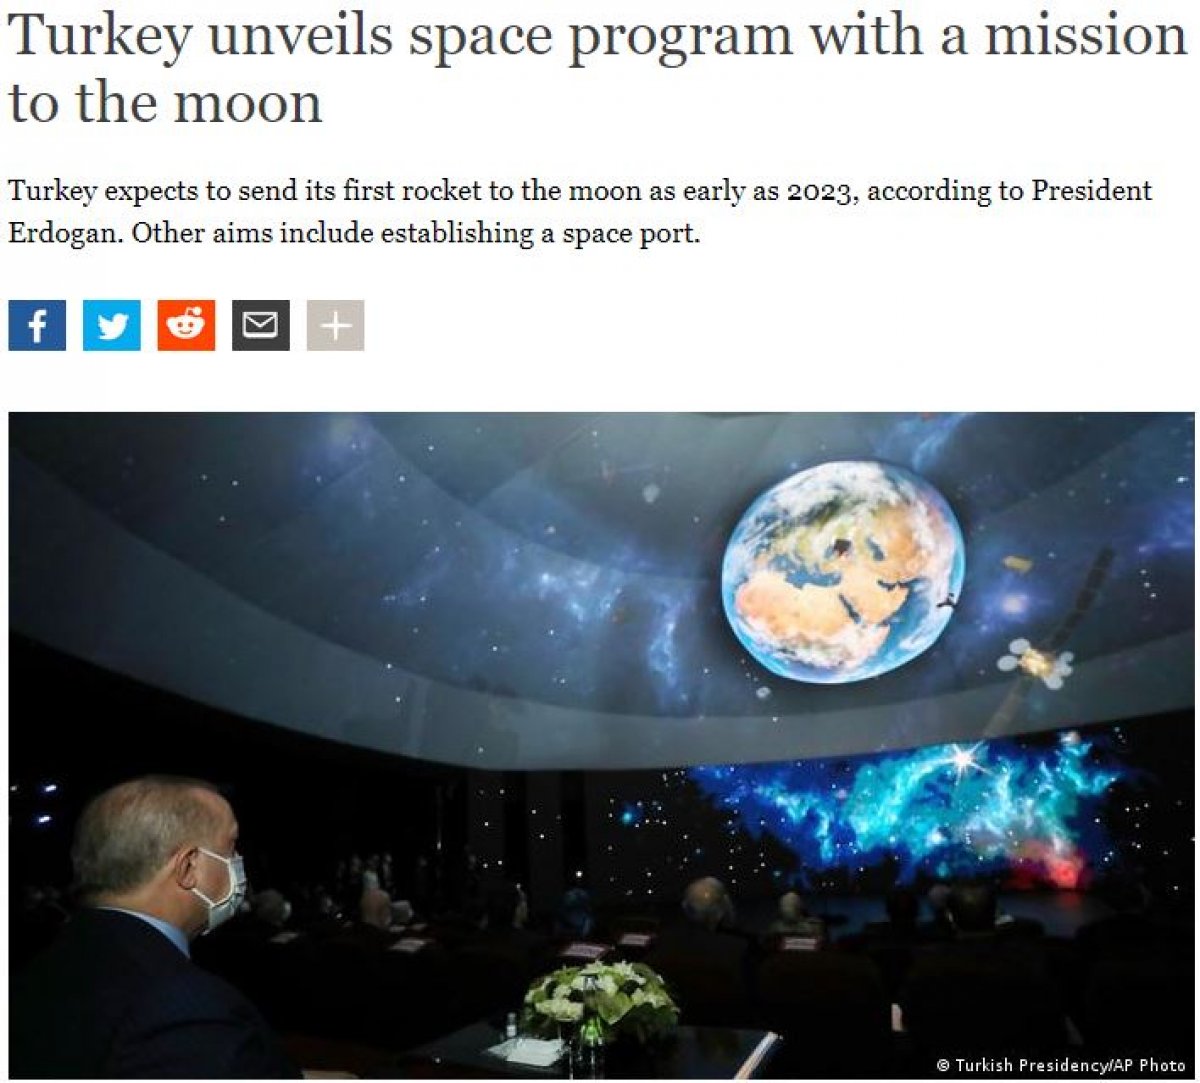 Turkey's National Space Program in the world press #2